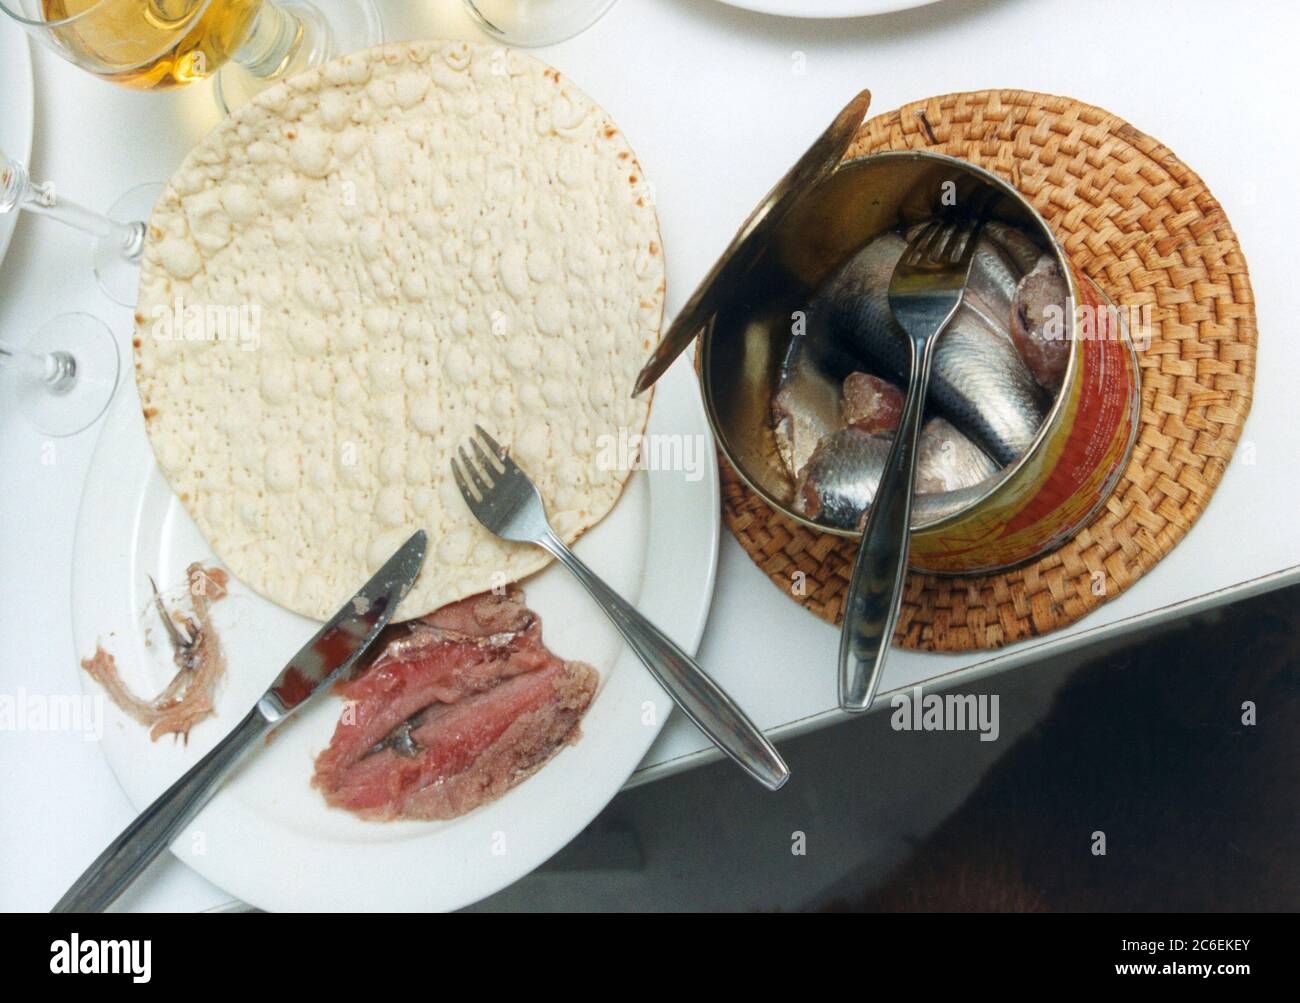 SURSTRÖMMING Sour Herring prepared to eat with flatbread Stock Photo